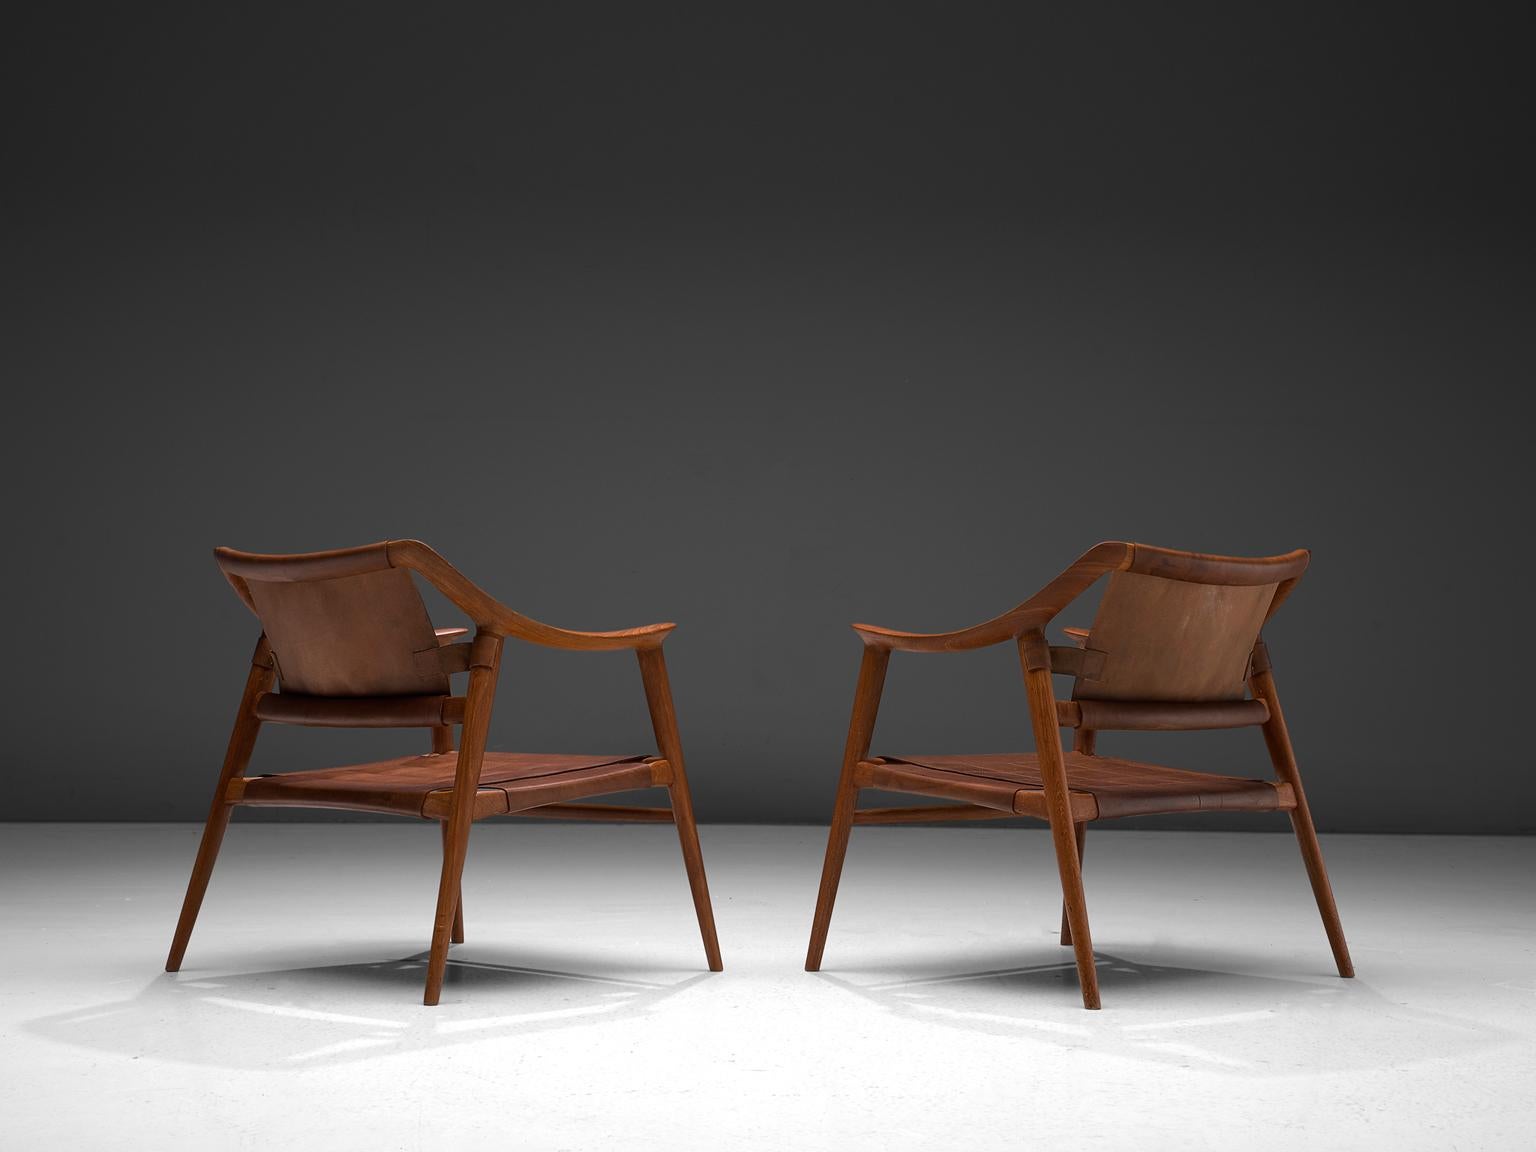 Rolf Rastad & Adolf Relling for Gustav Bahus set of two armchairs model 56/2 'Bambi', teak and leather, Norway, circa 1954. 

Excellent example of the 'Bambi' lounge chair of Rolf Rastad and Adolf Reling. This edition consist of a teak frame and